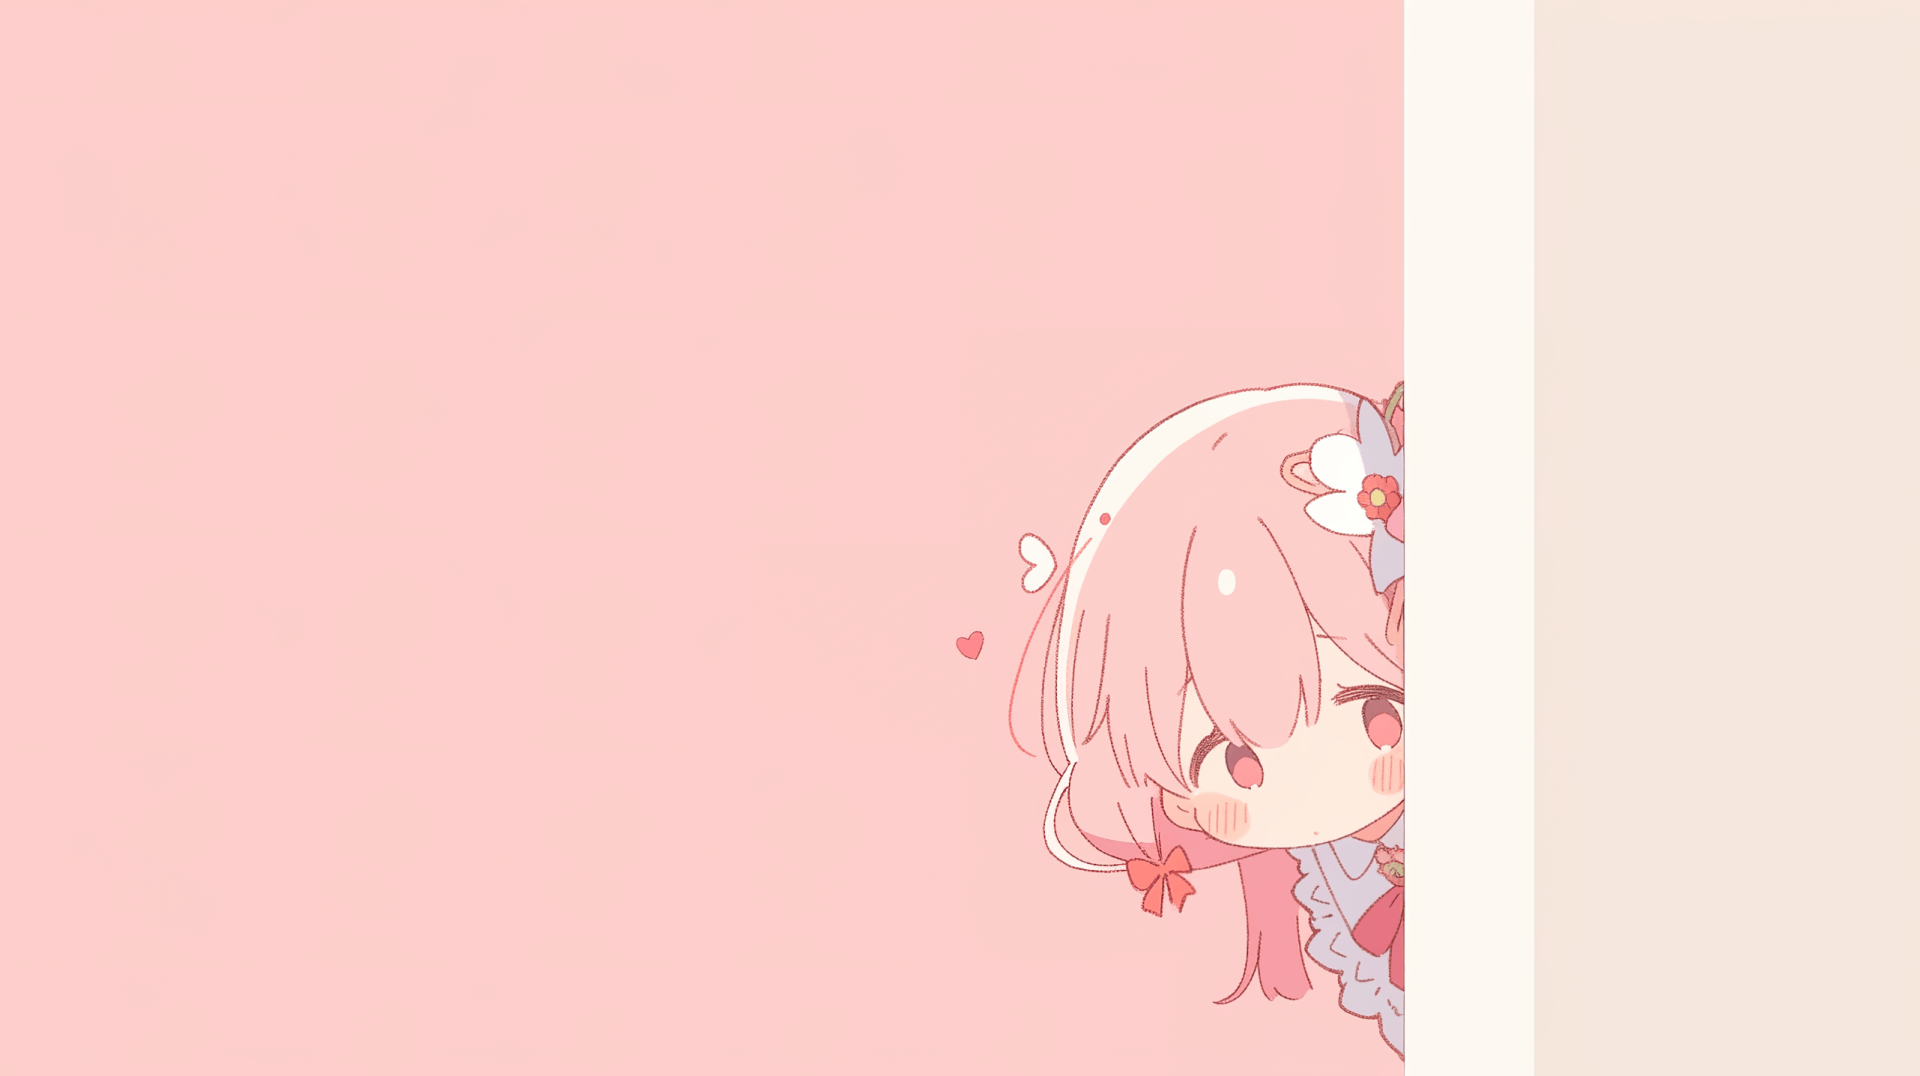 A cute anime girl with pink hair peeking out from behind a wall - Kawaii